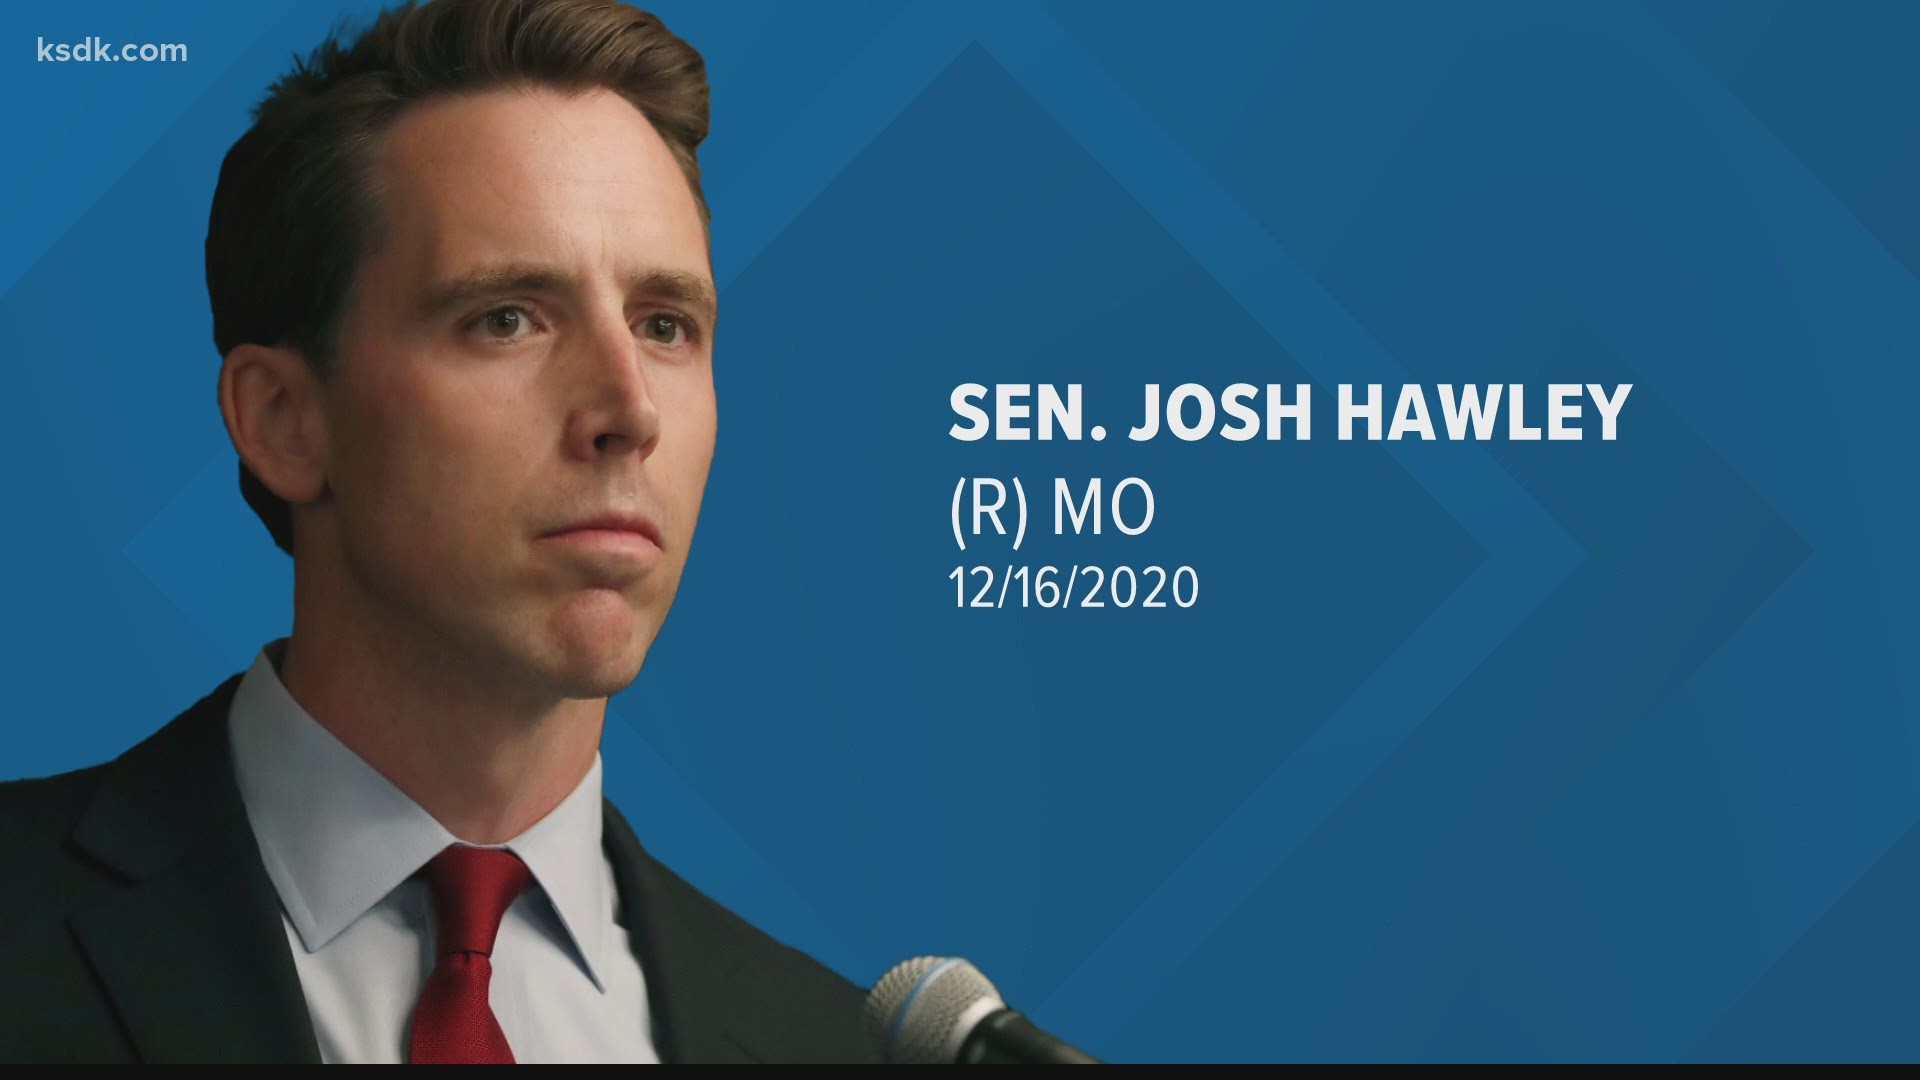 Josh Hawley has denied he said the election could be overturned on Jan. 6.